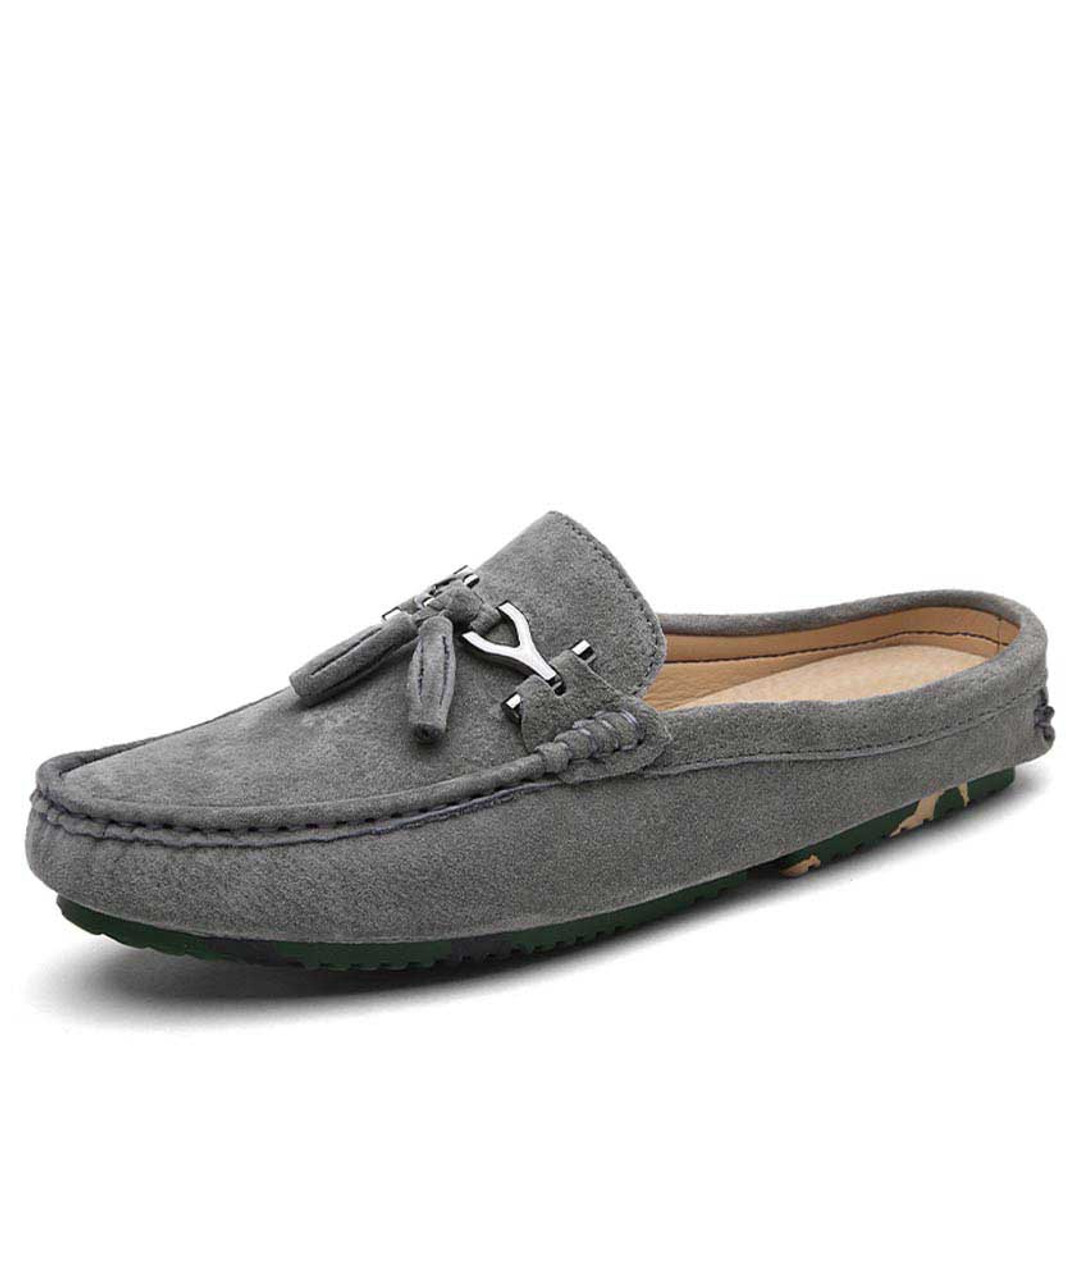 slip on shoes loafers